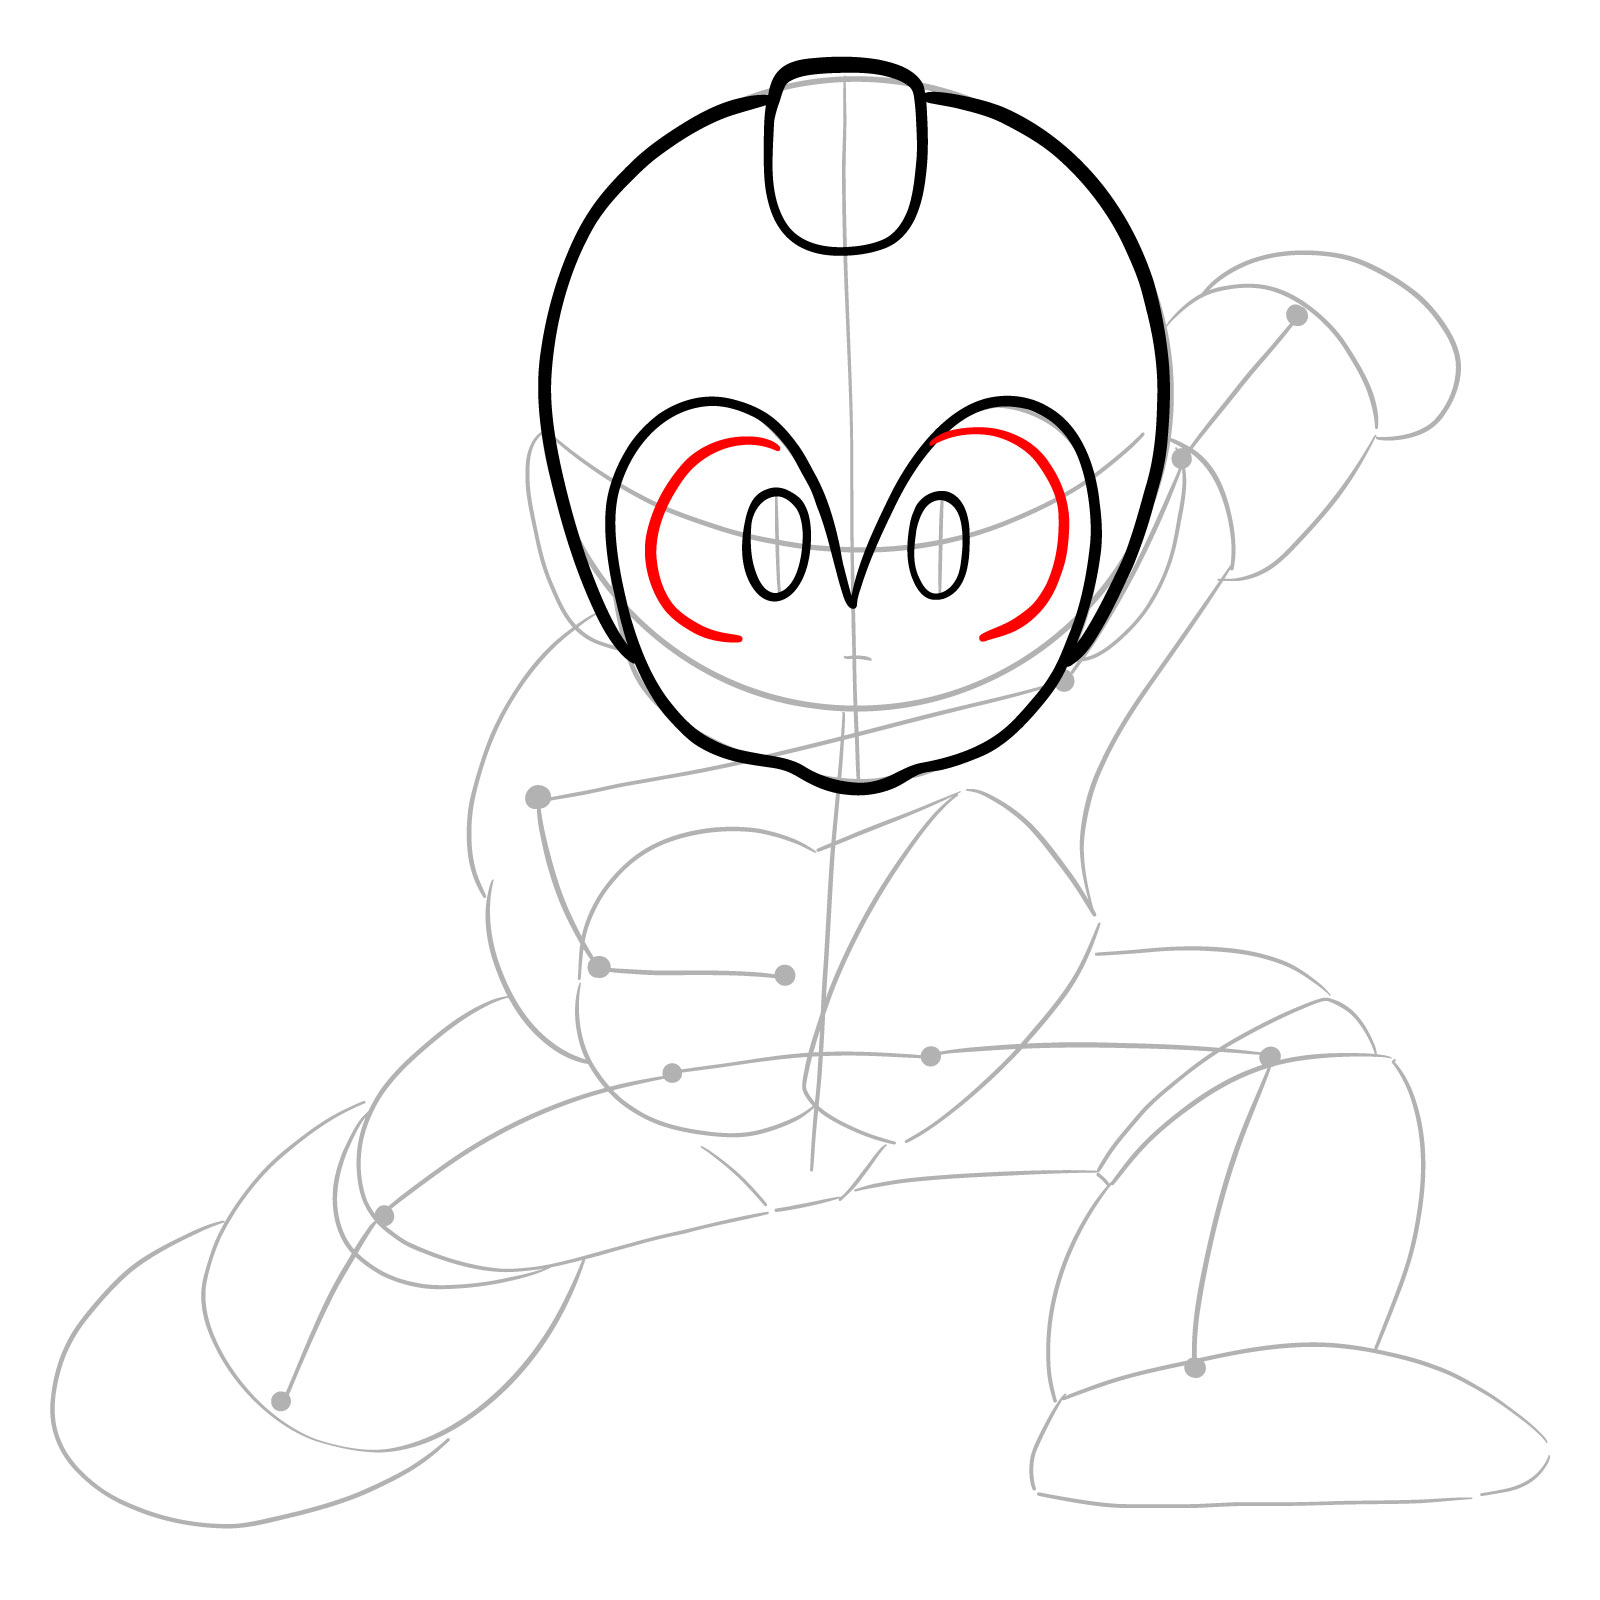 How to draw Mega Man from the original game - step 07